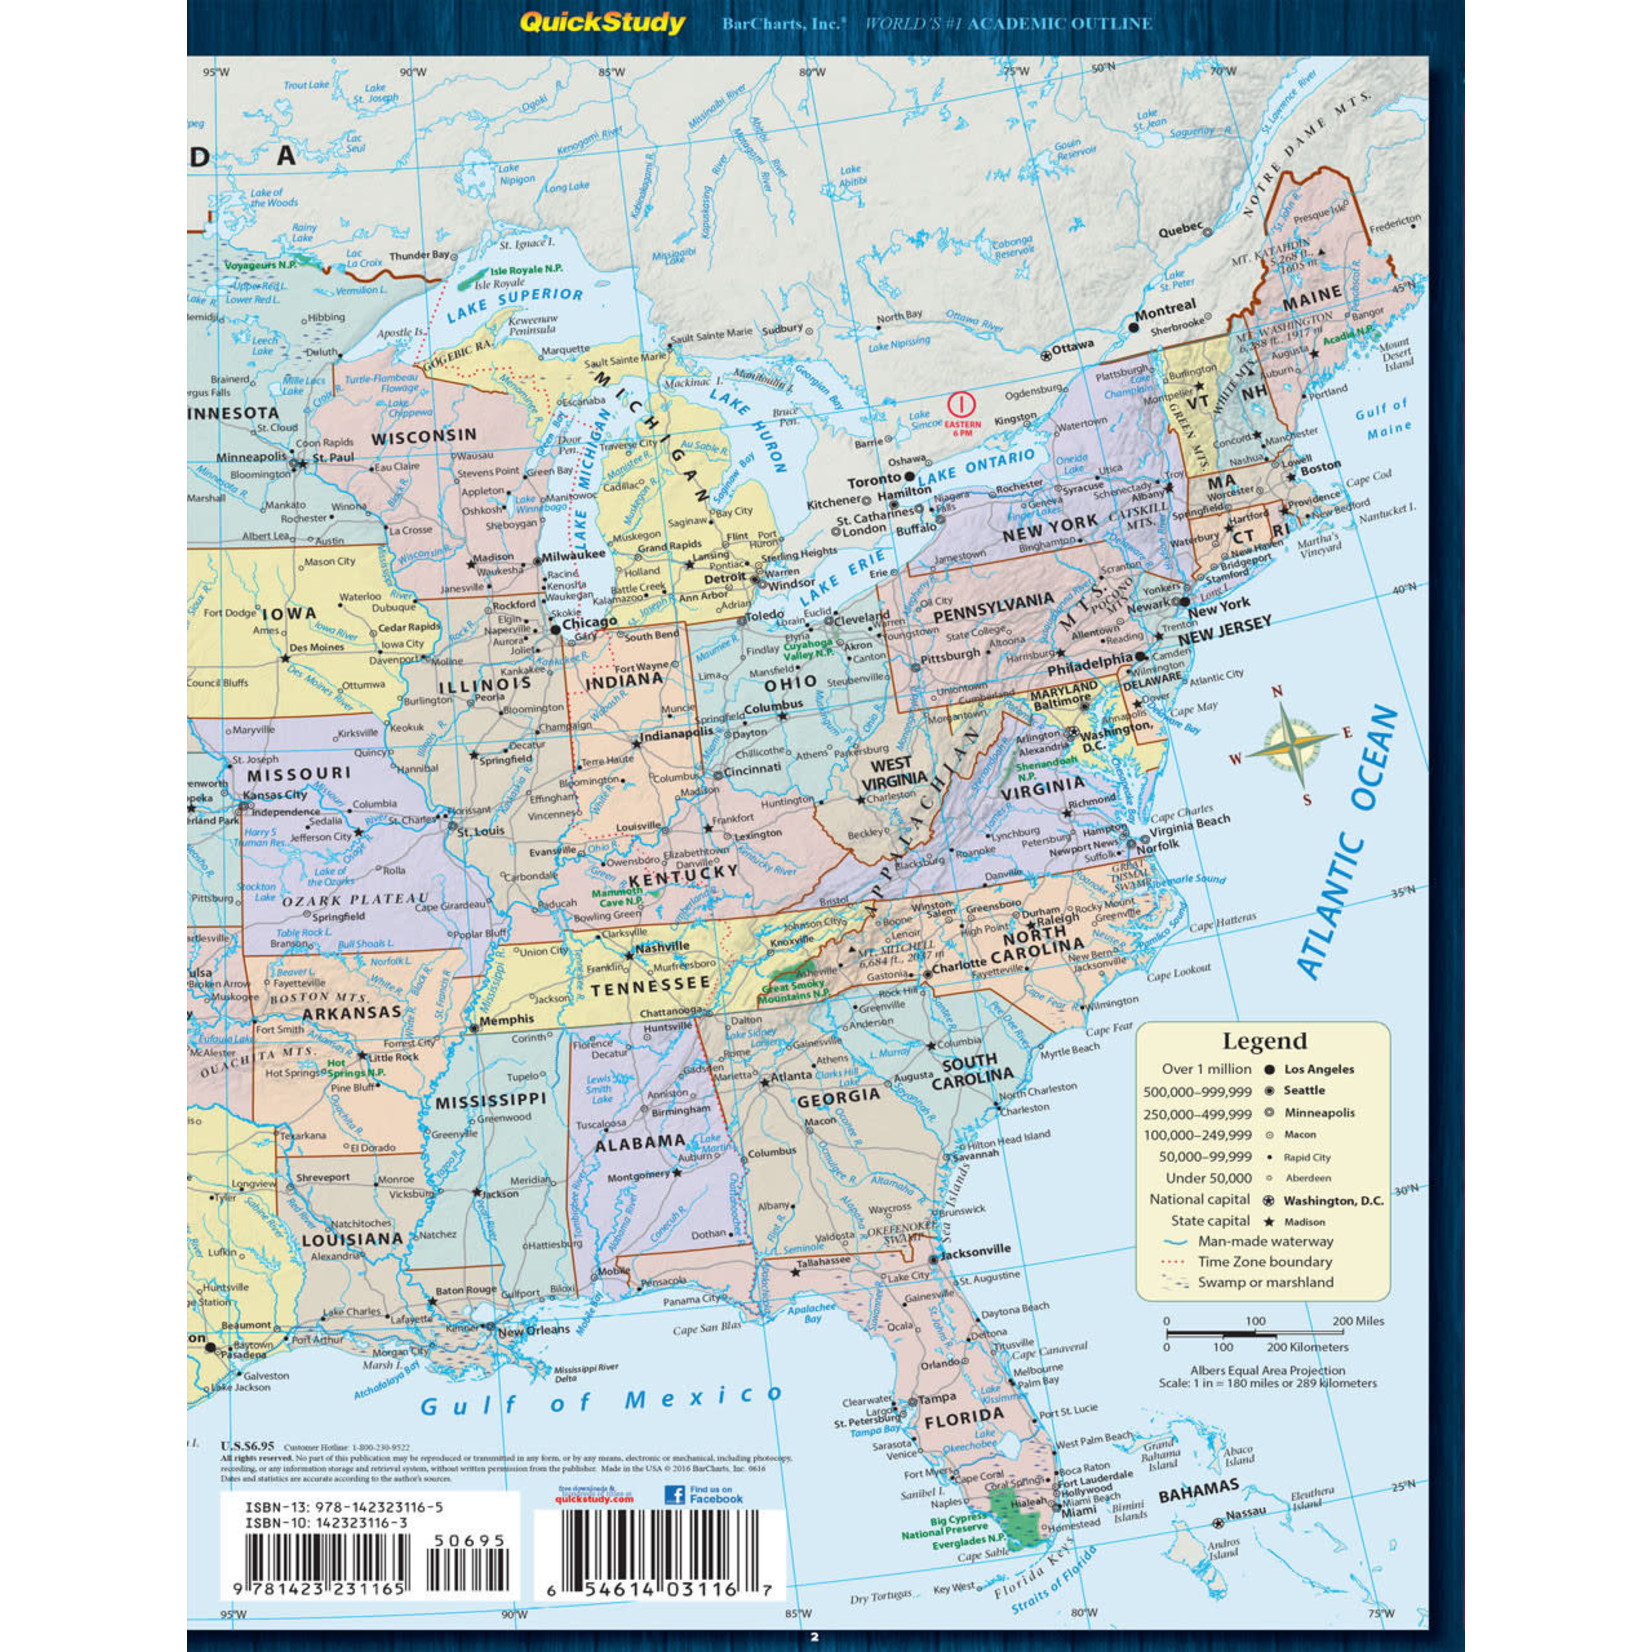 BAR CHARTS QuickStudy | U.S. Map: States & Cities Laminated Reference Guide